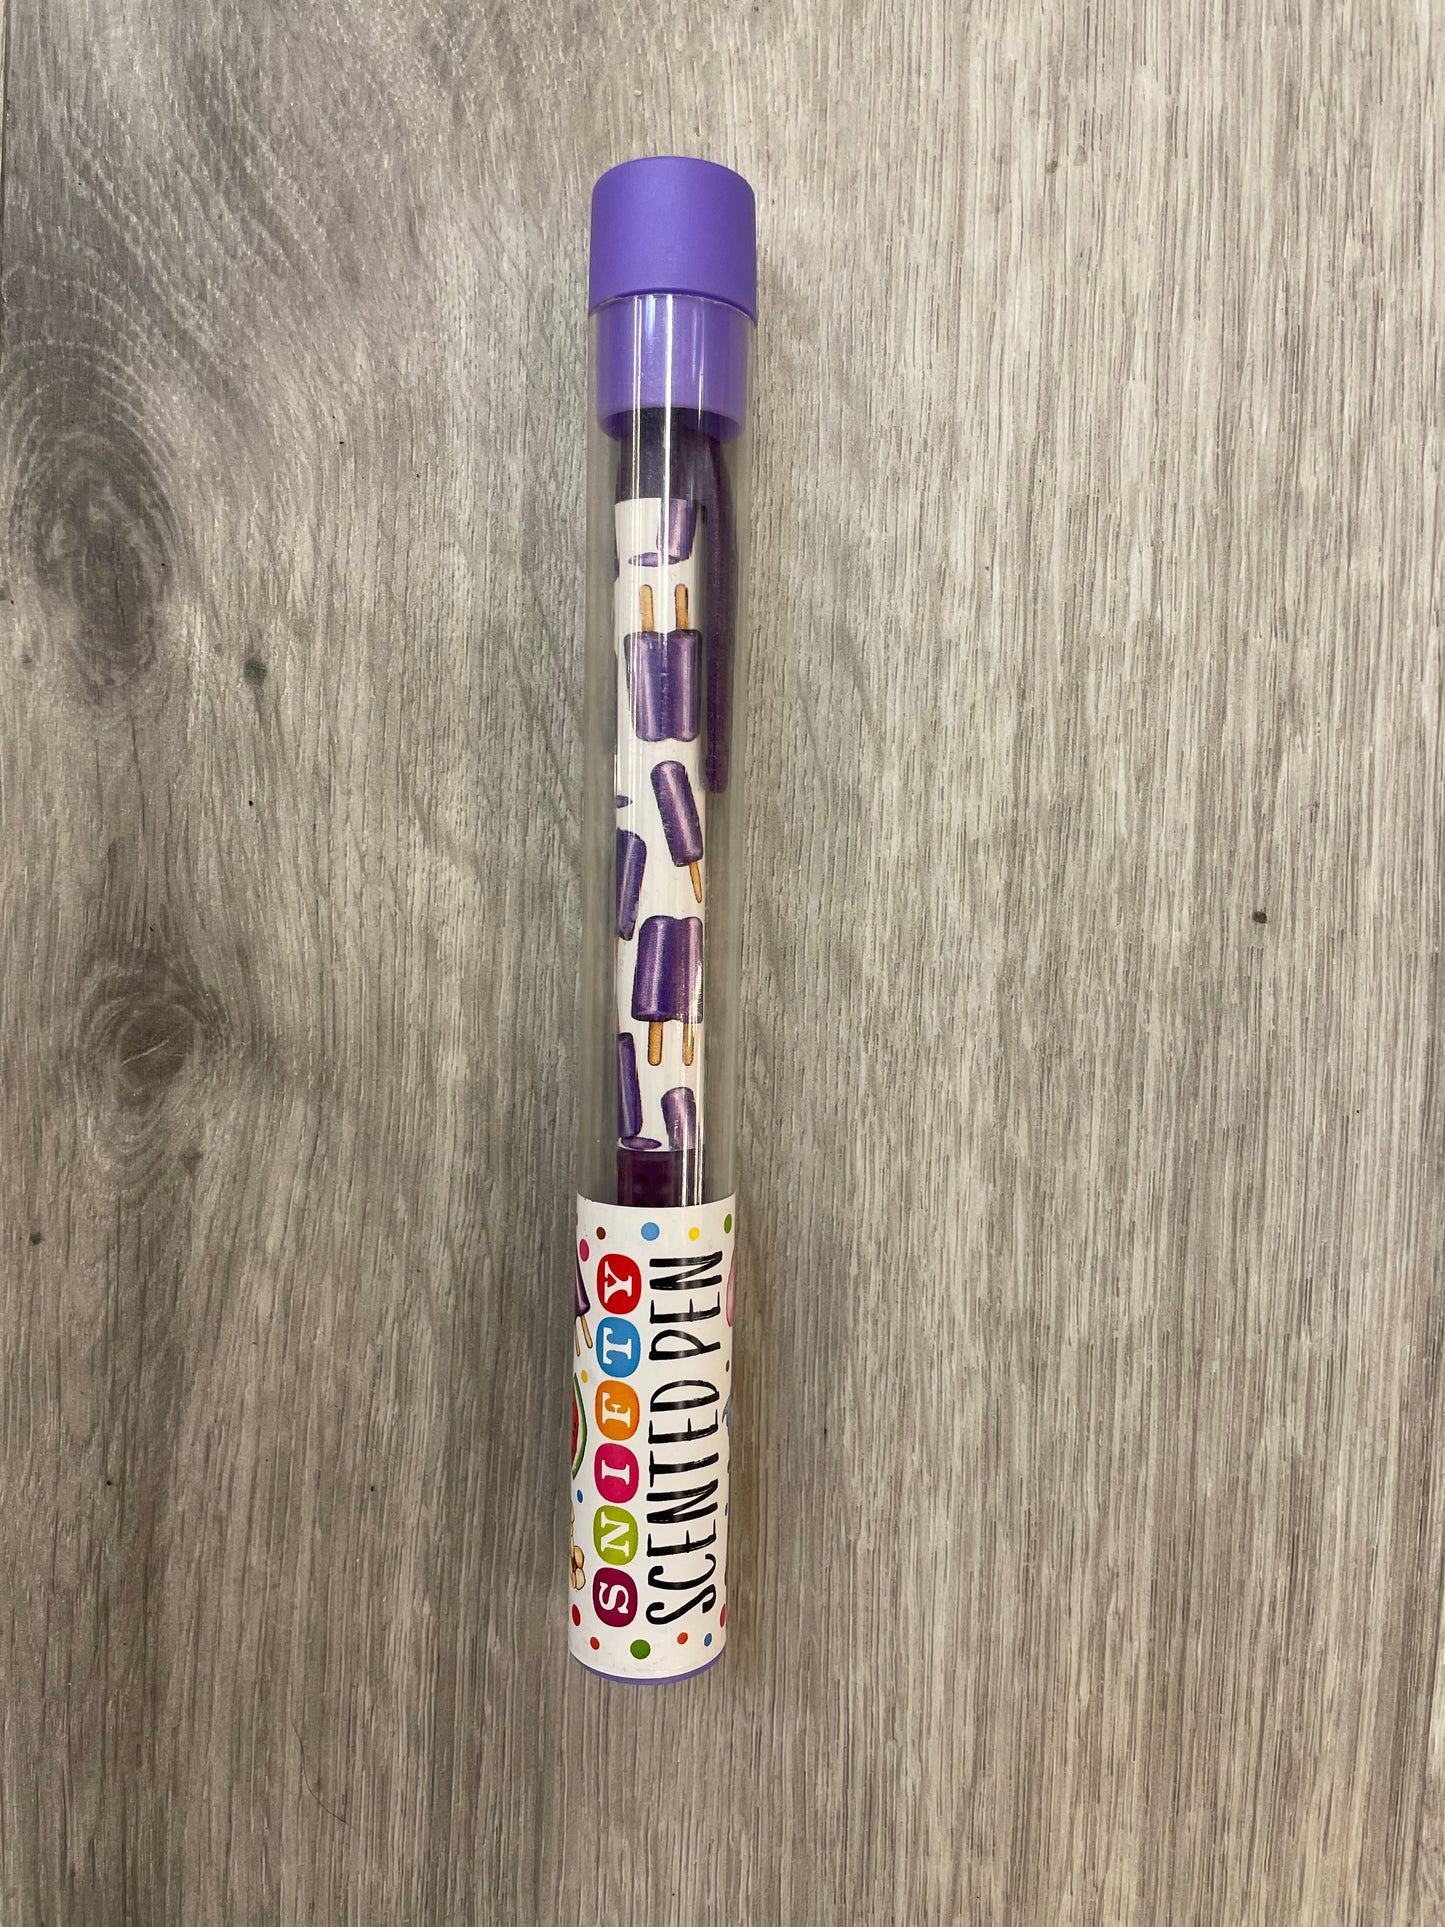 Snifty Pen In A Tube Scented Fruits